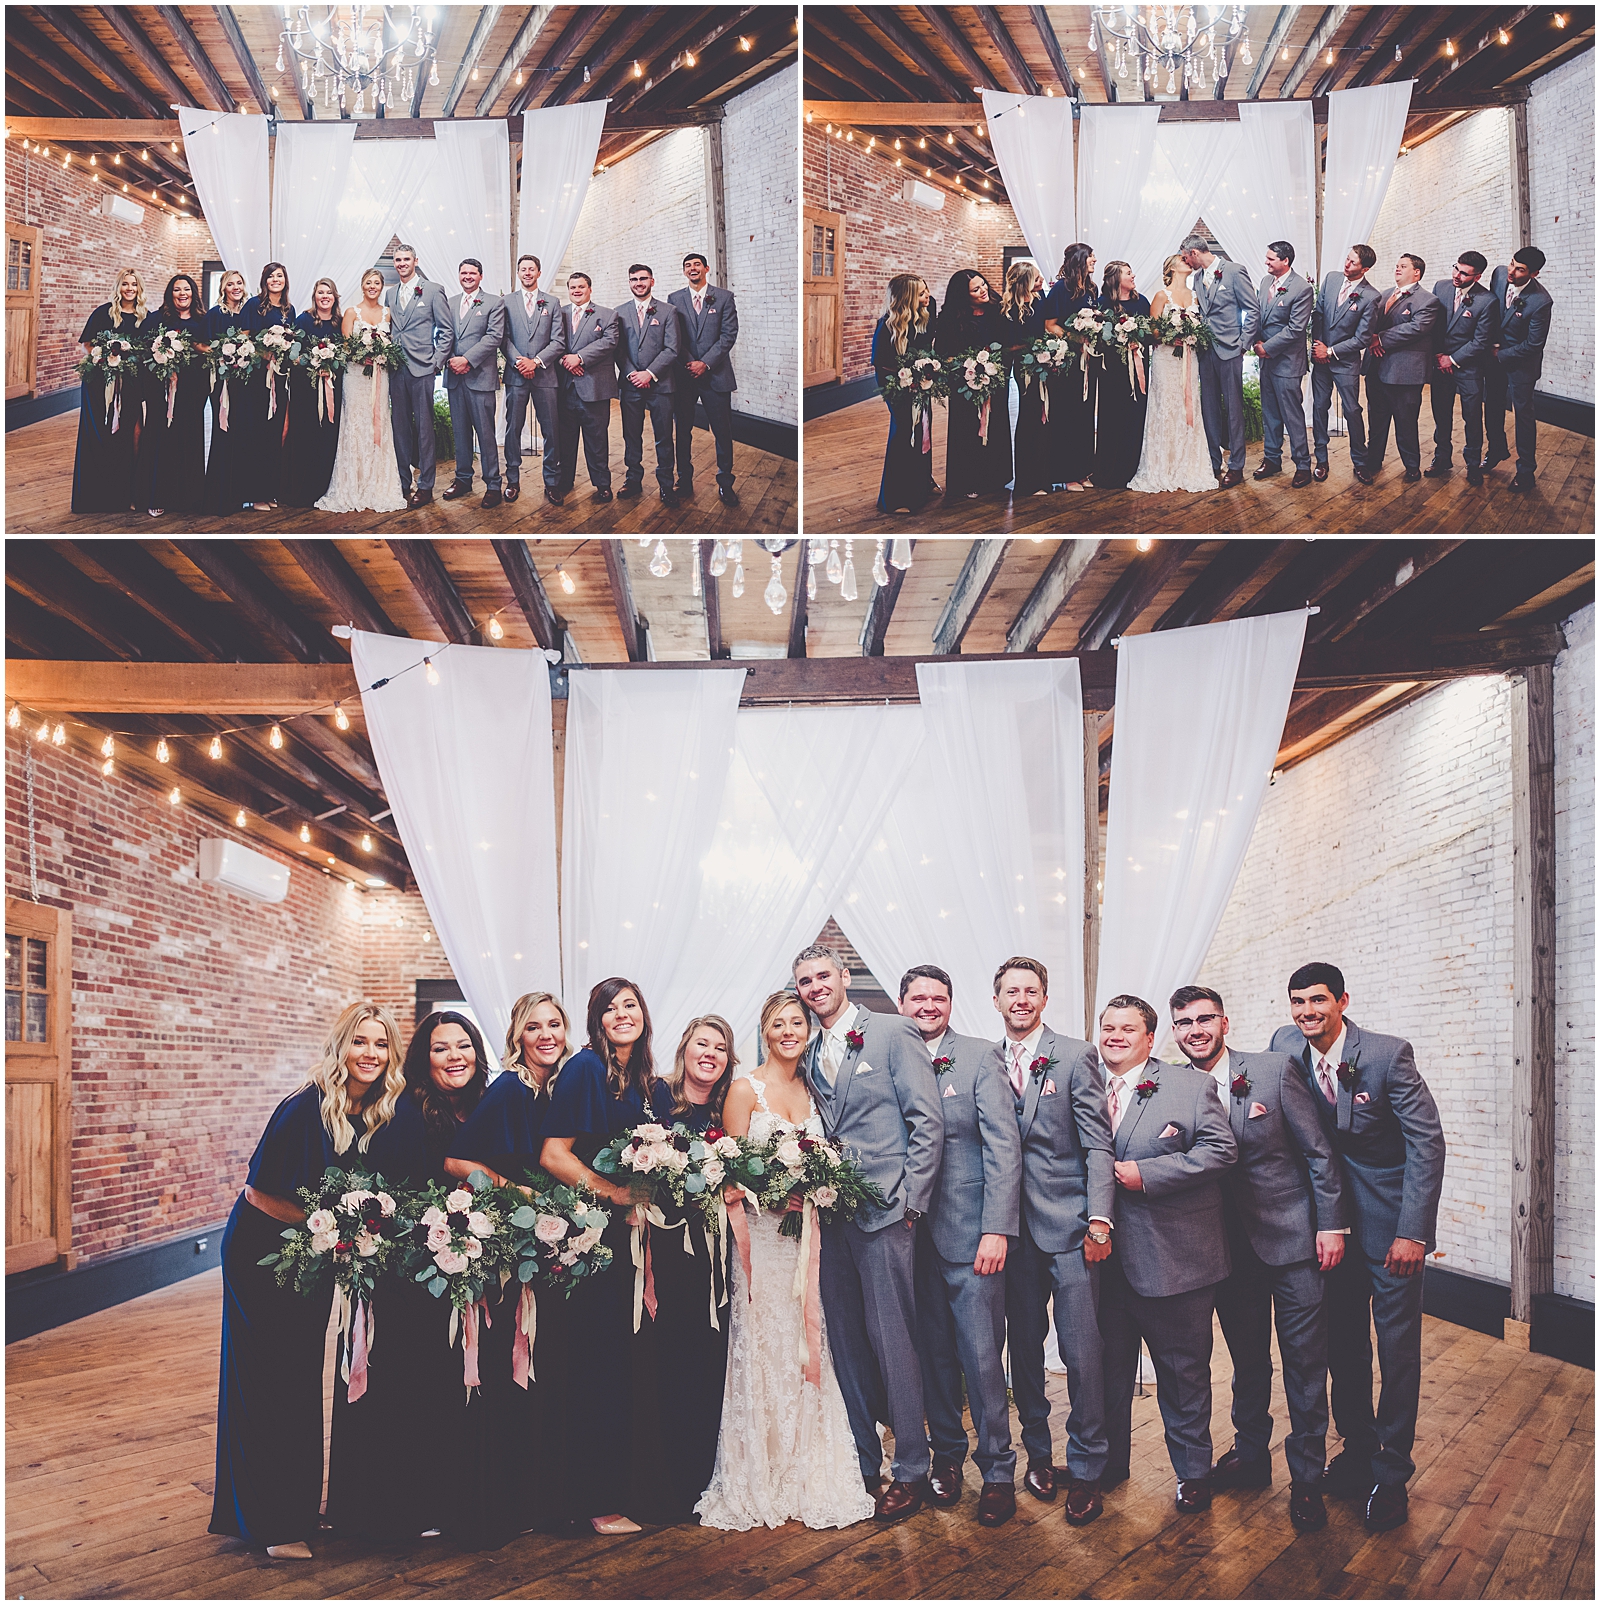 Kendra and Cole's rainy rustic navy & blush wedding at Town & Country Events in Milford, IL with Chicagoland wedding photographer Kara Evans Photographer.